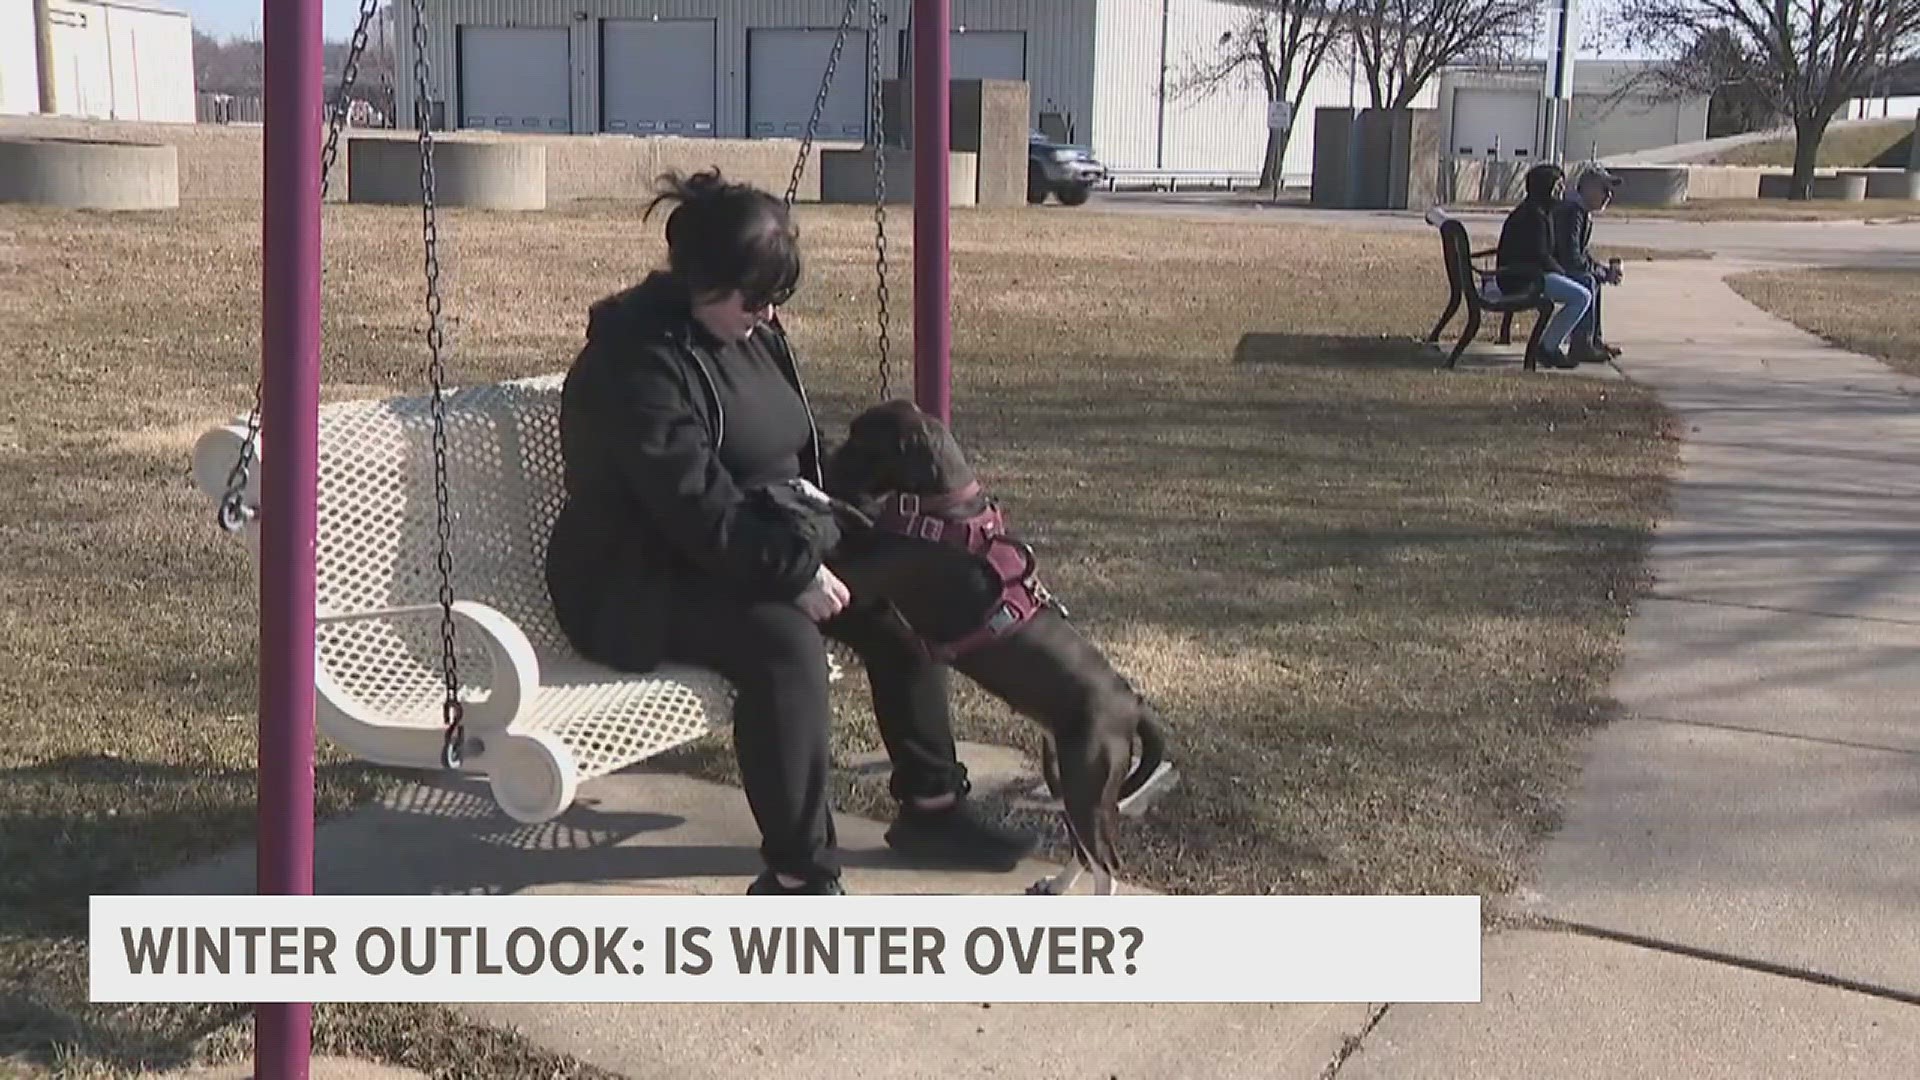 As the weather starts to warm up in the usually frigid month of February, many are wondering if winter is over. We asked two meteorologists for their opinions.